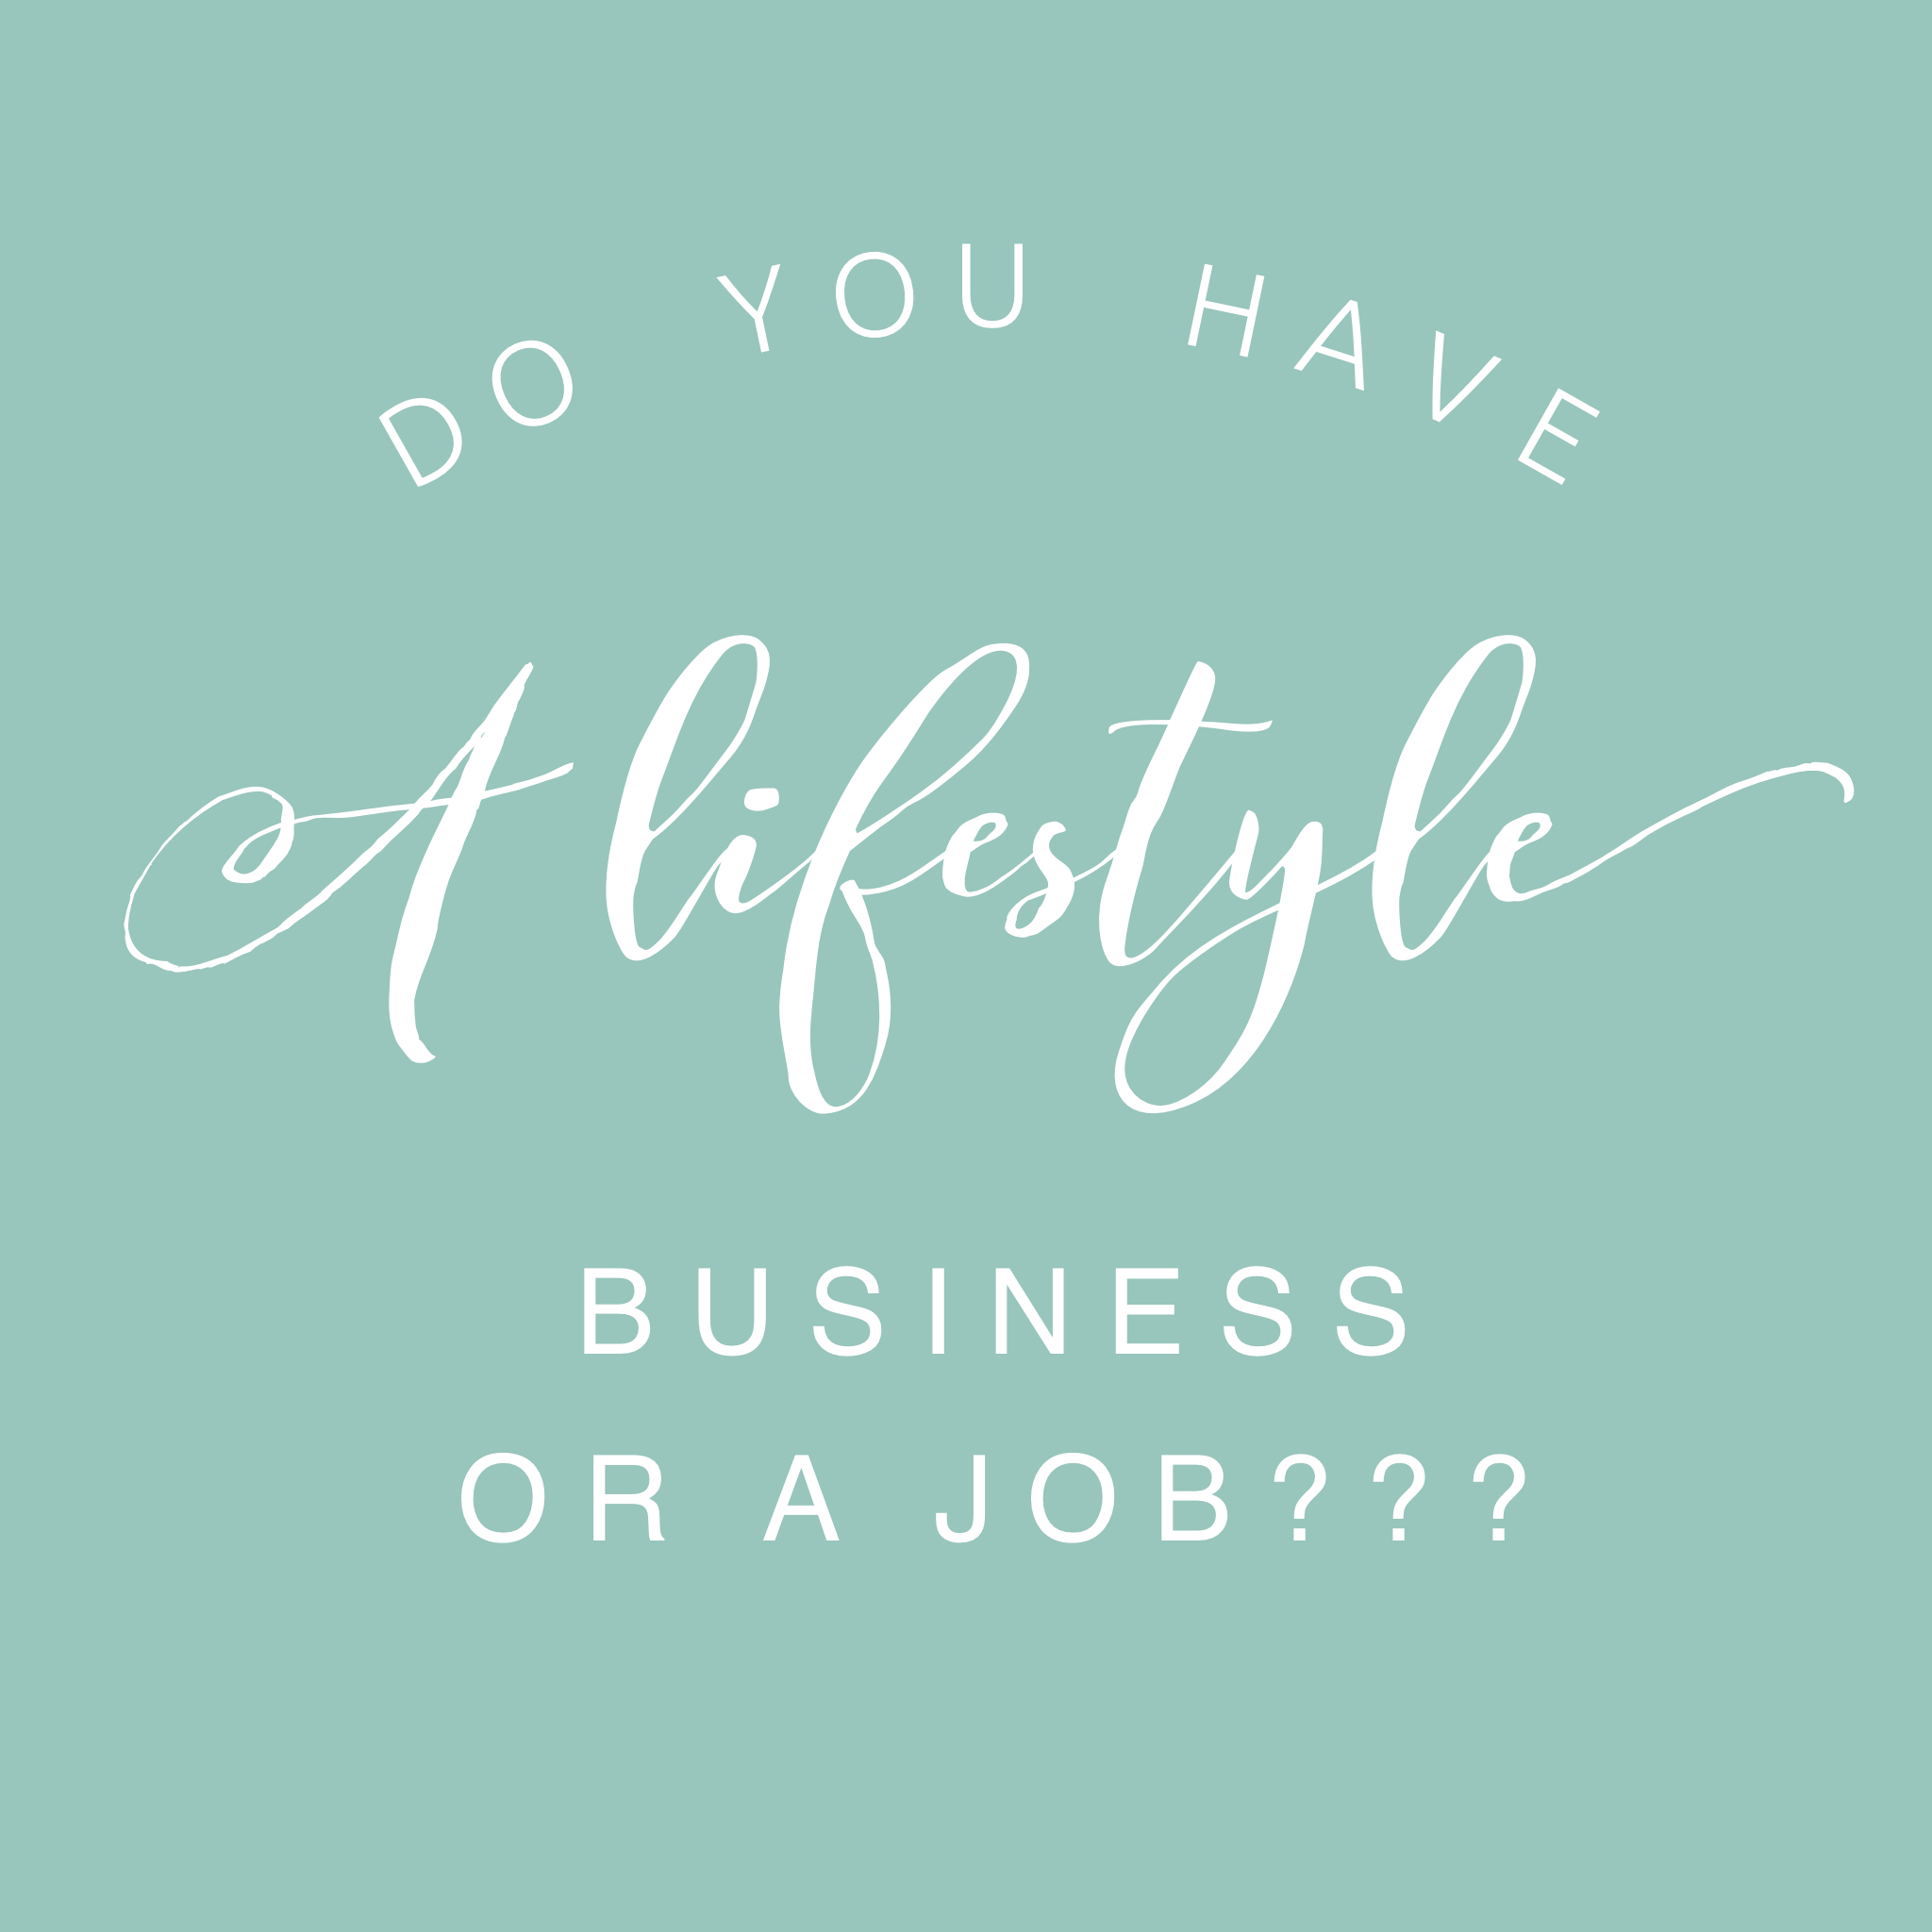 Do you have a Job or a Business that supplies residual income???